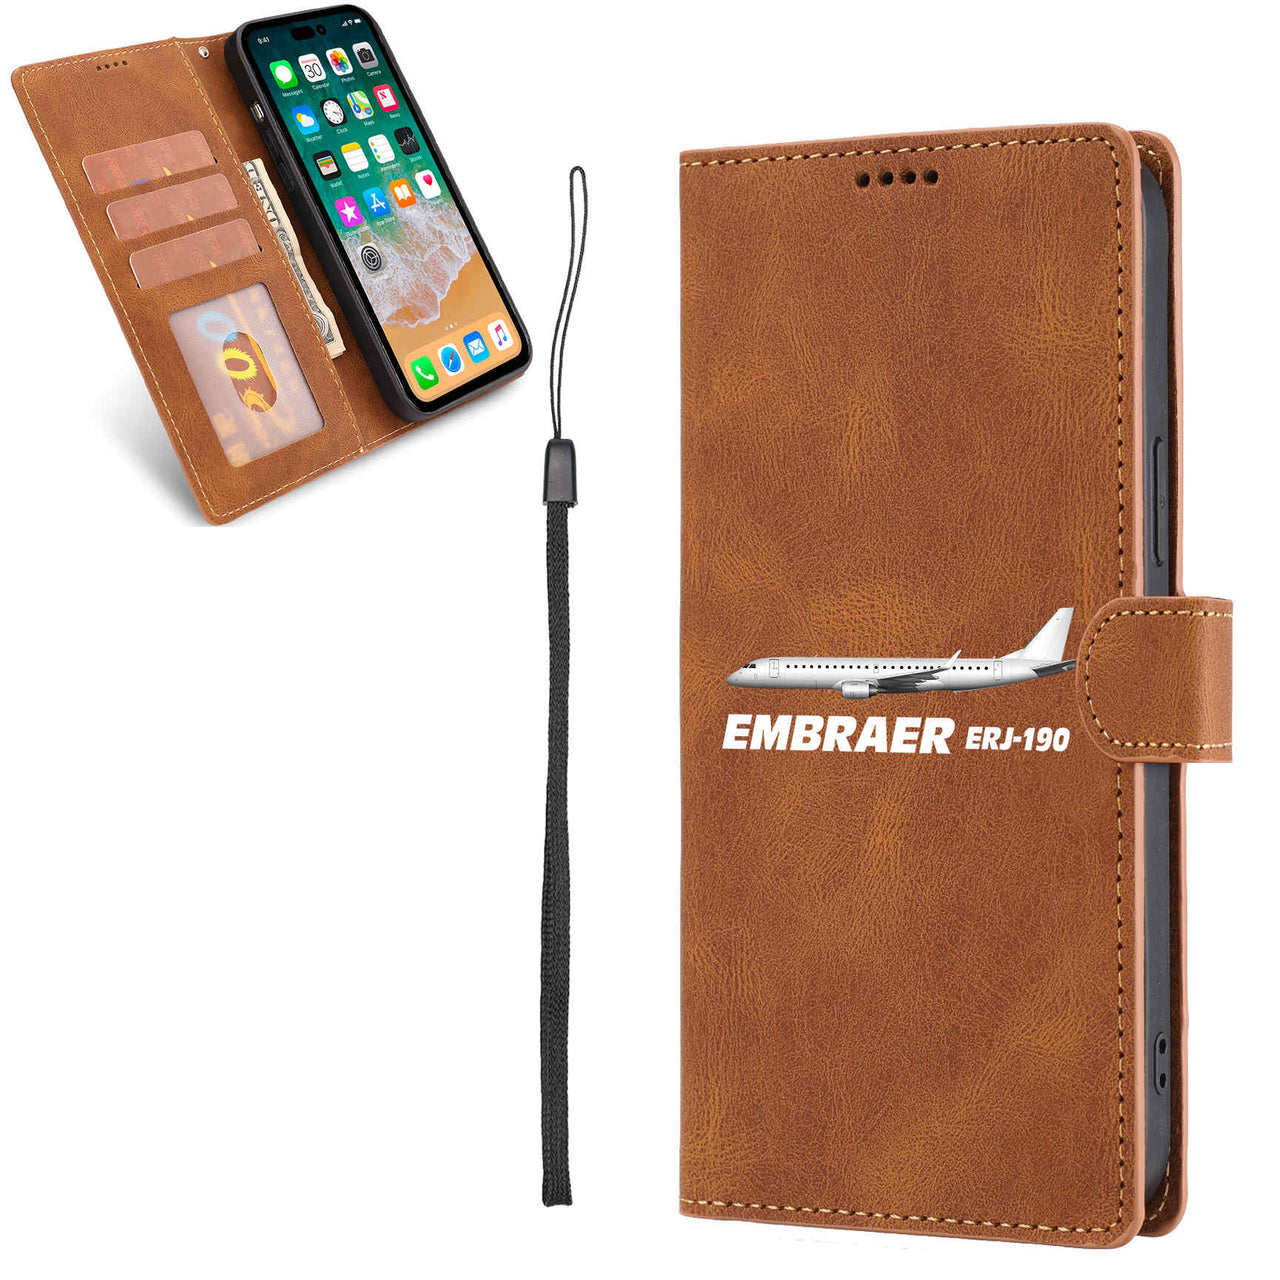 The Embraer ERJ-190 Leather Samsung A Cases